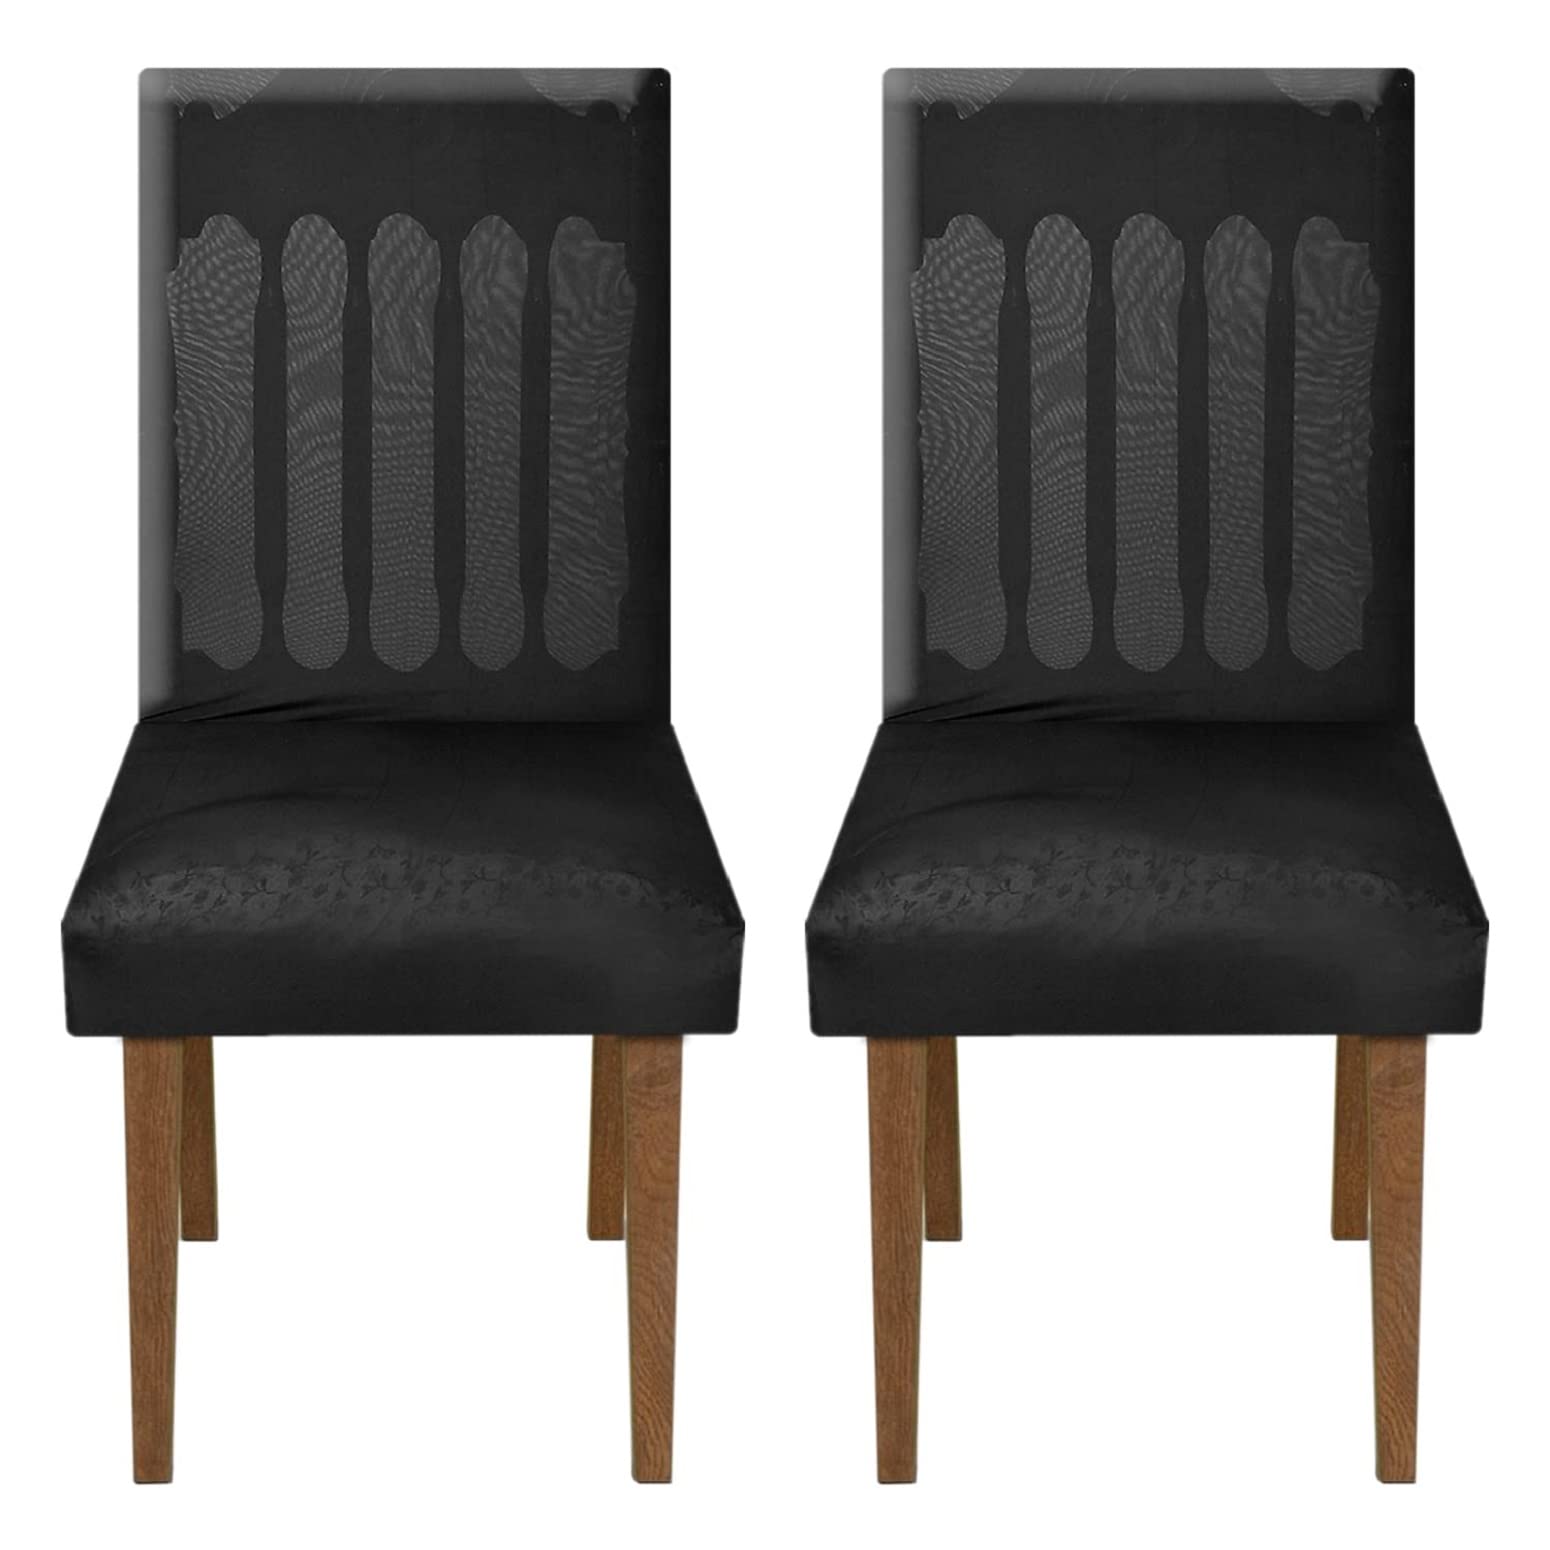 Kuber Industries Elastic Stretchable Polyster Chair Cover for Home, Office, Hotels, Wedding Banquet- Pack of 2 (Black)-50KM0969